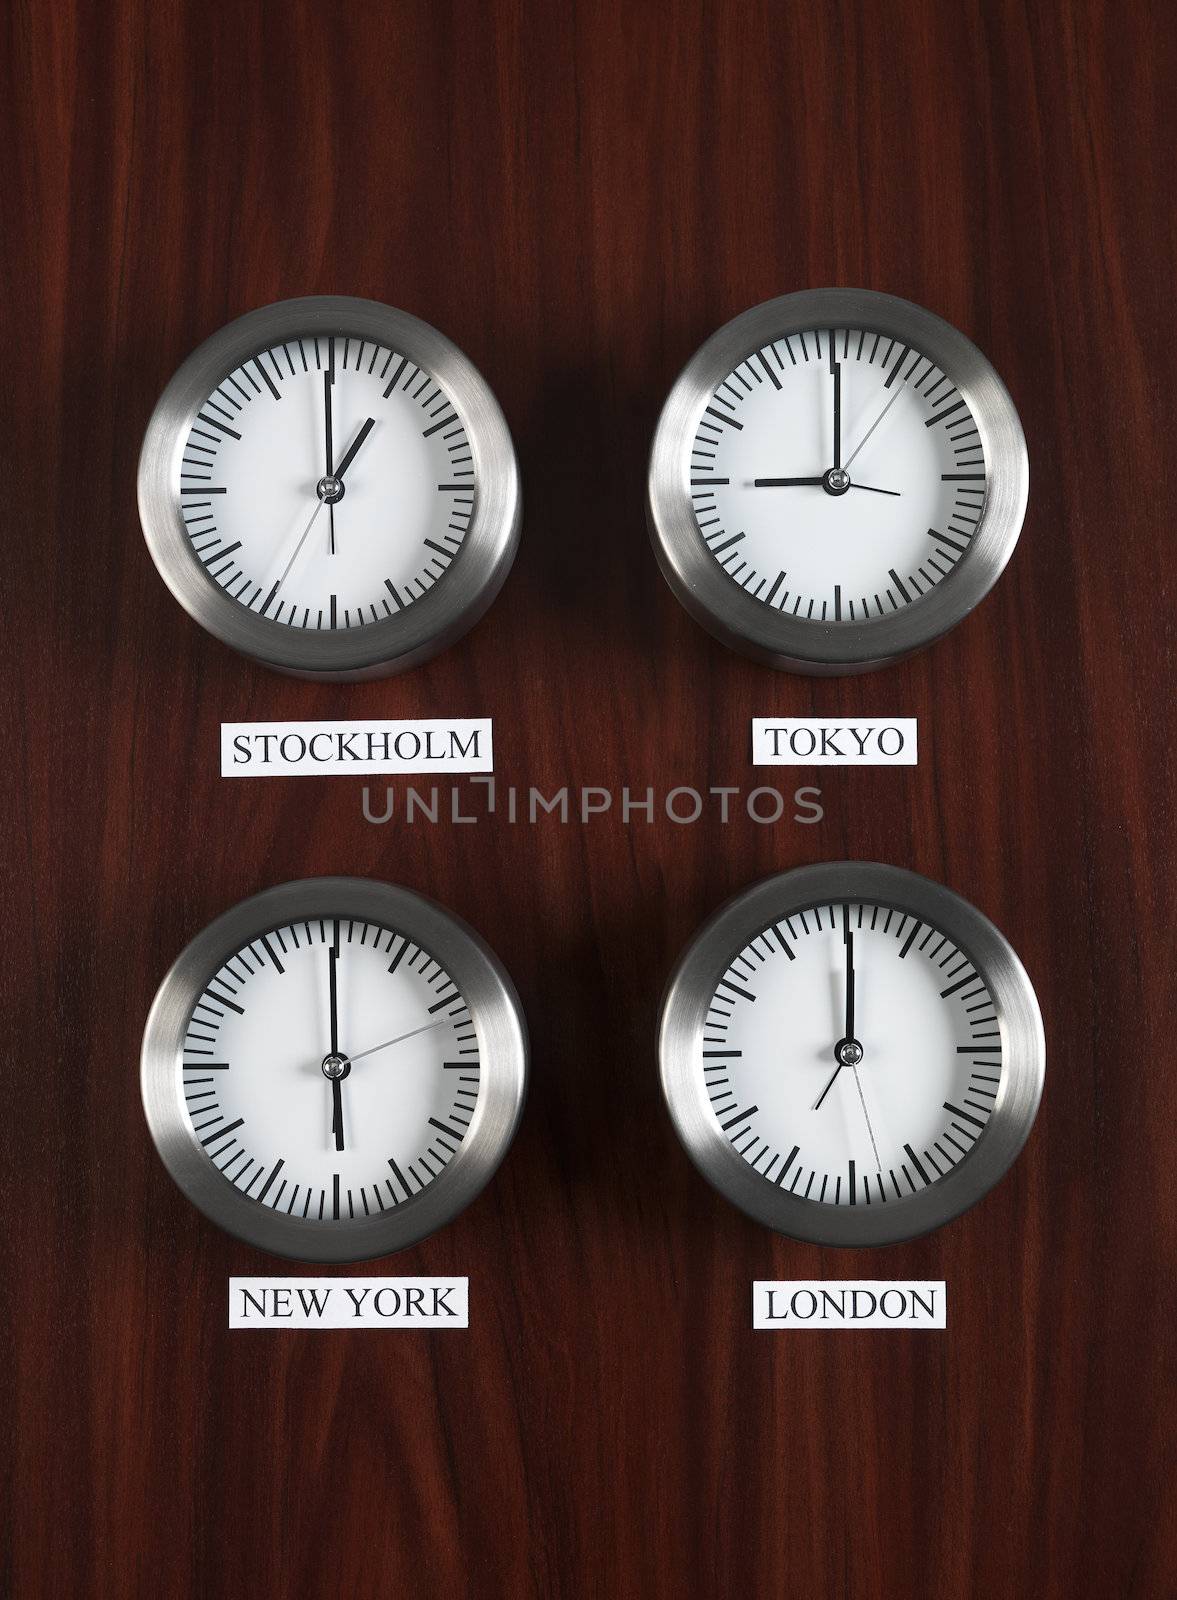 Four clocks with different time on Teak background